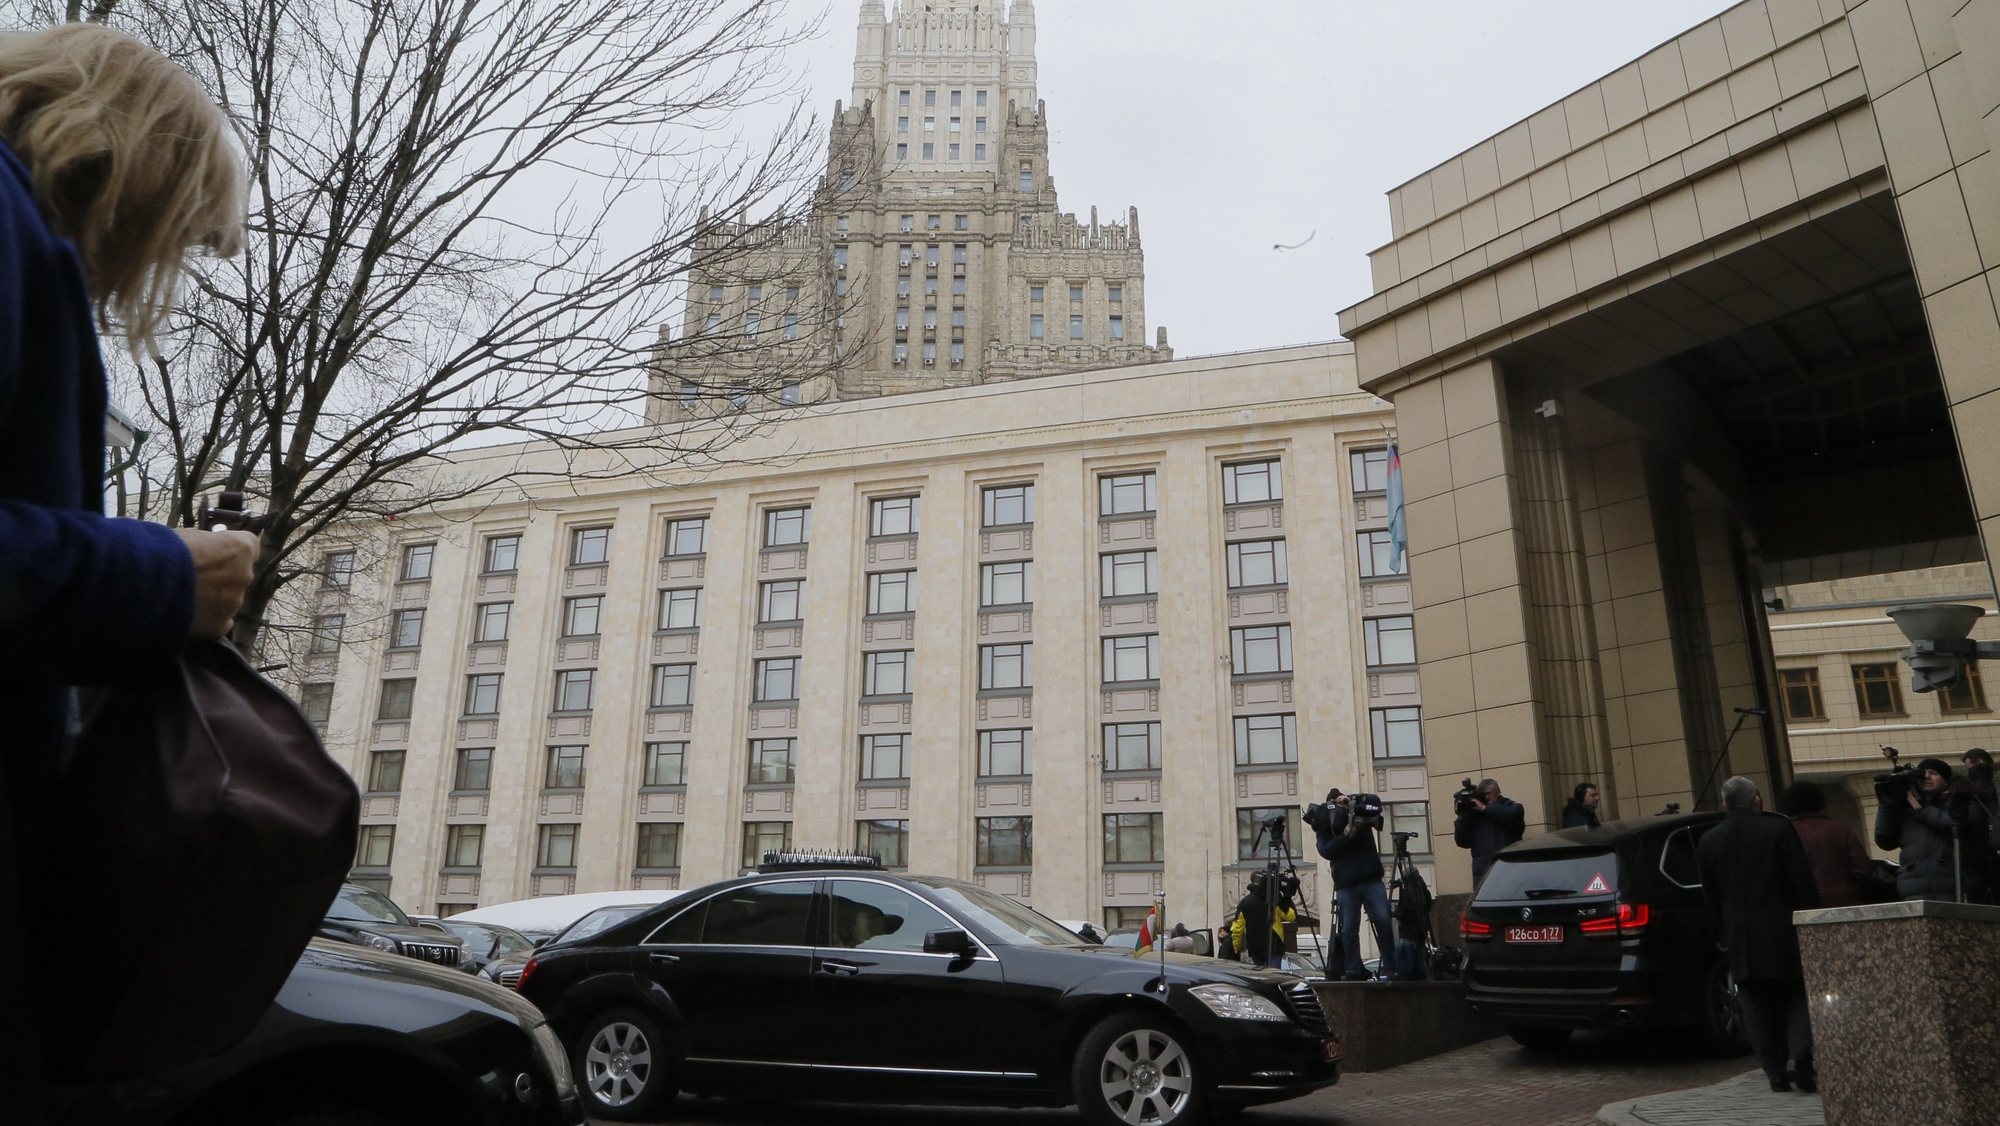 epa06617583 Cars of foreign diplomats arrive to the Russian Foreign Ministry building in Moscow, Russia, 21 March 2018. Foreign diplomats arrive to attend a Russian Foreign Ministry&#039;s briefing on Sergei Skripal and his daughter Yulia poisoning case. British Prime Minister Theresa May ordered the expulsion of 23 Russian diplomats, who left Britain on 20 March, in retaliation for the poisoning of the former Russian spy Sergei Skripal aged 66 and his daughter Yulia, aged 33, who were found suffering from extreme exposure to a rare nerve agent in Salisbury southern England, on 04 March 2018. Skripal and his daughter Yulia remain in a &#039;very serious&#039; condition.  EPA/MAXIM SHIPENKOV